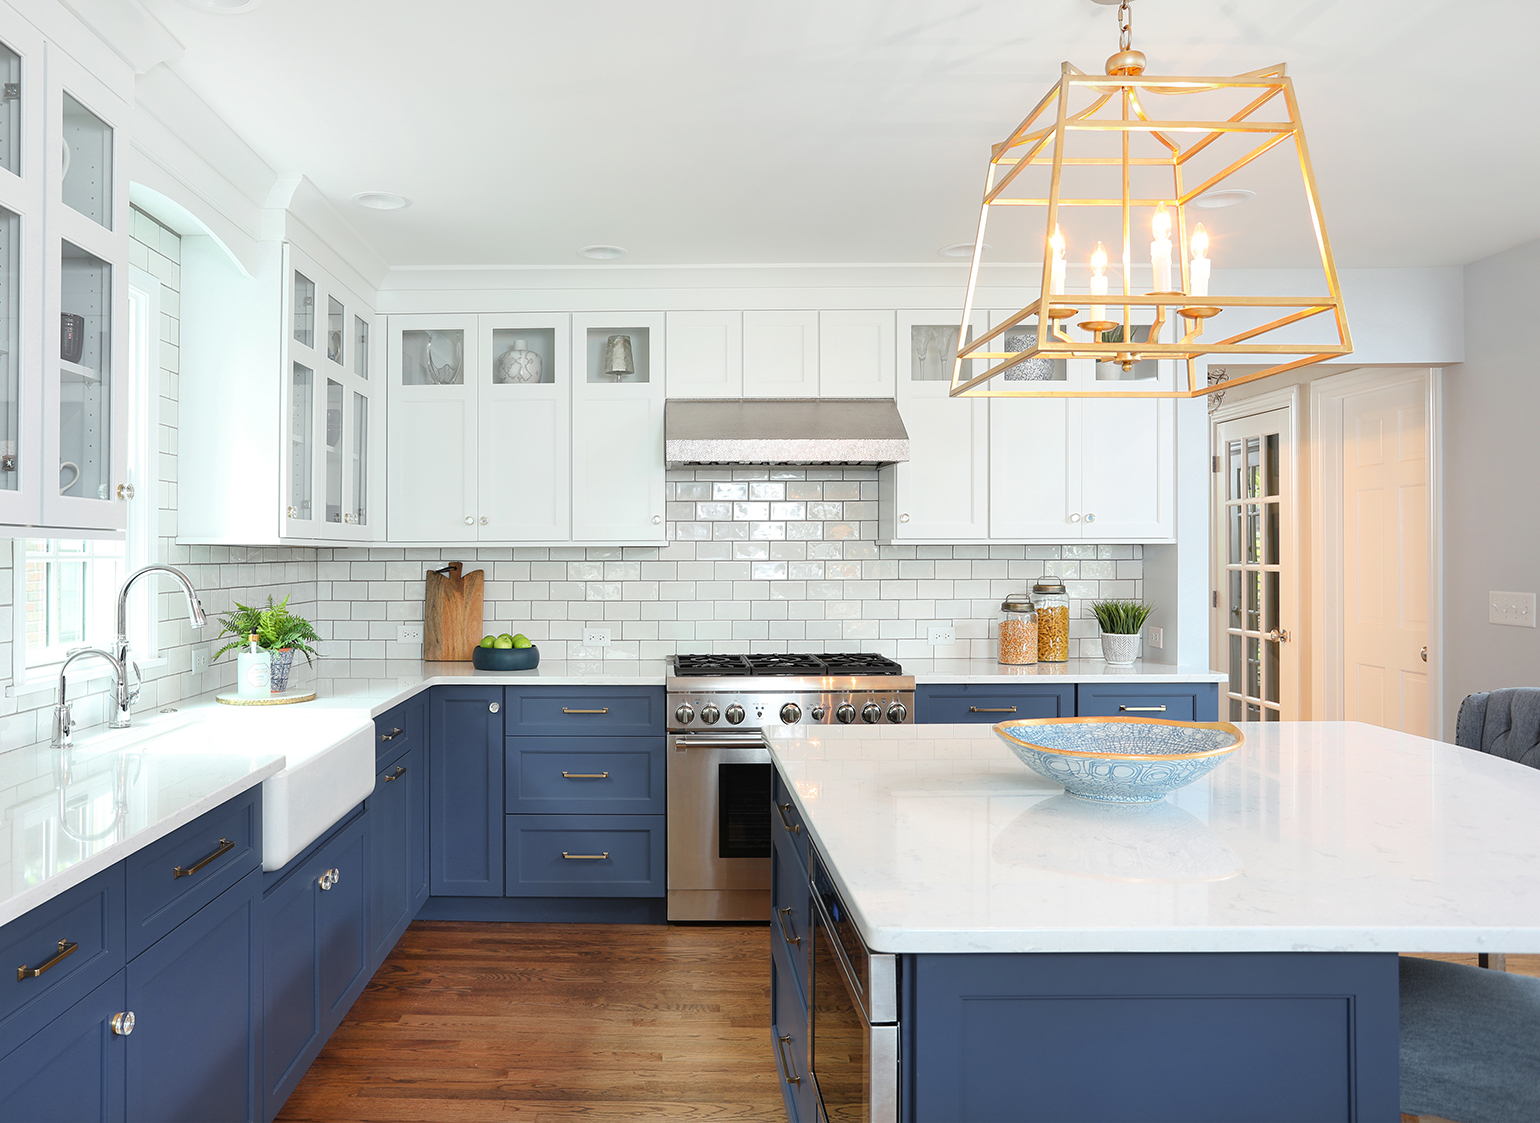 How To Create A Timeless Kitchen With Blue And White Kitchen Cabinets